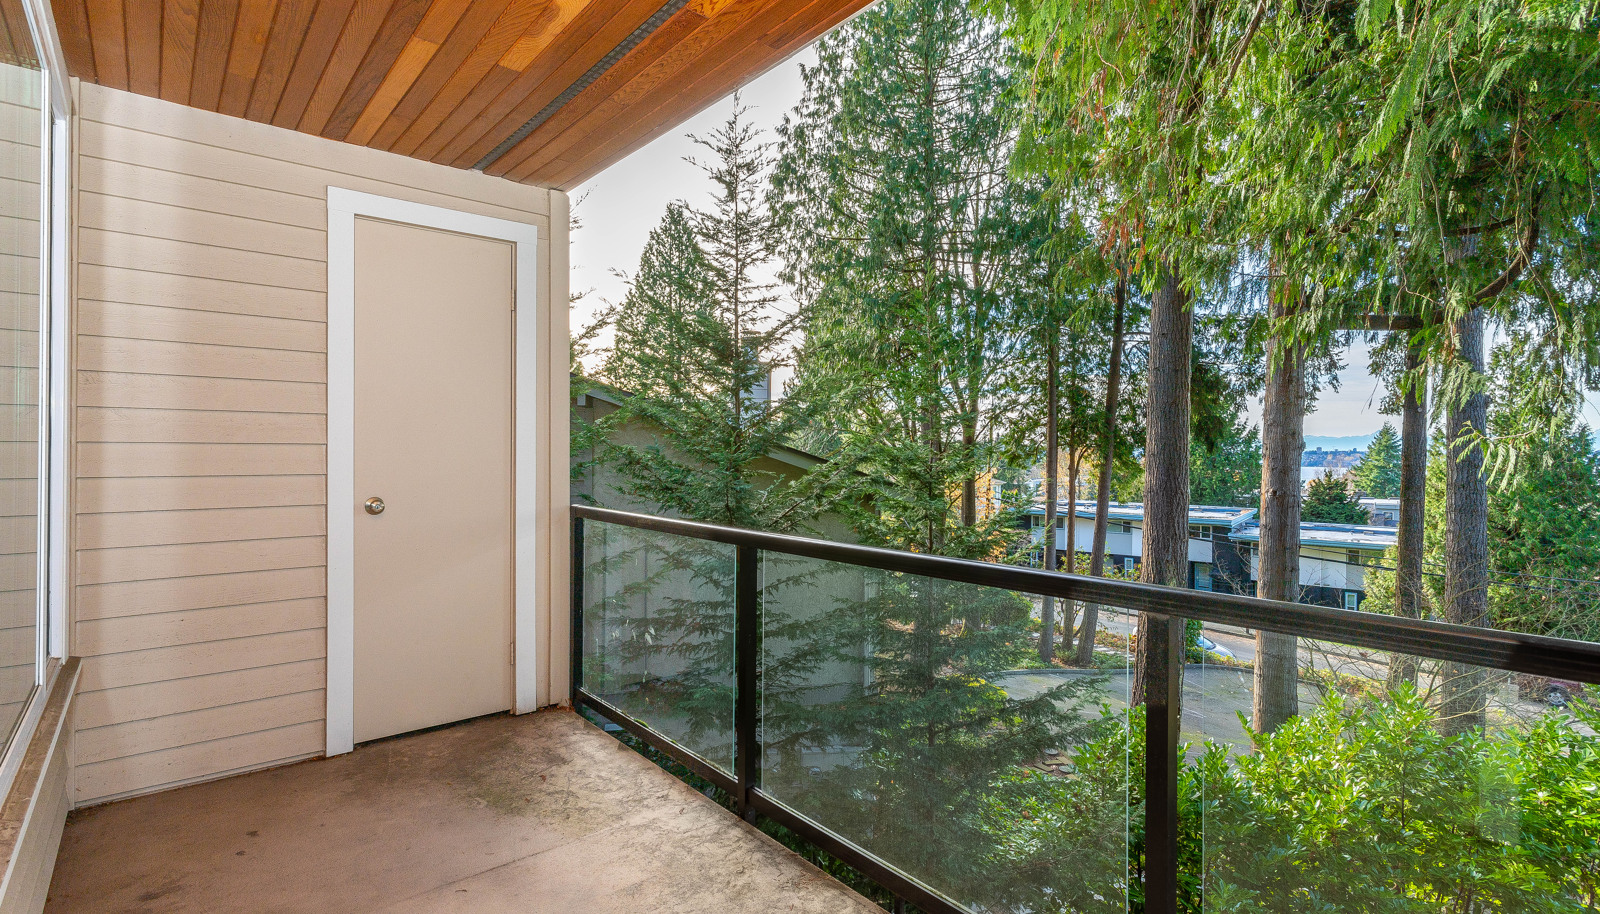 Enjoy the covered deck with a peek-a-boo lake view!